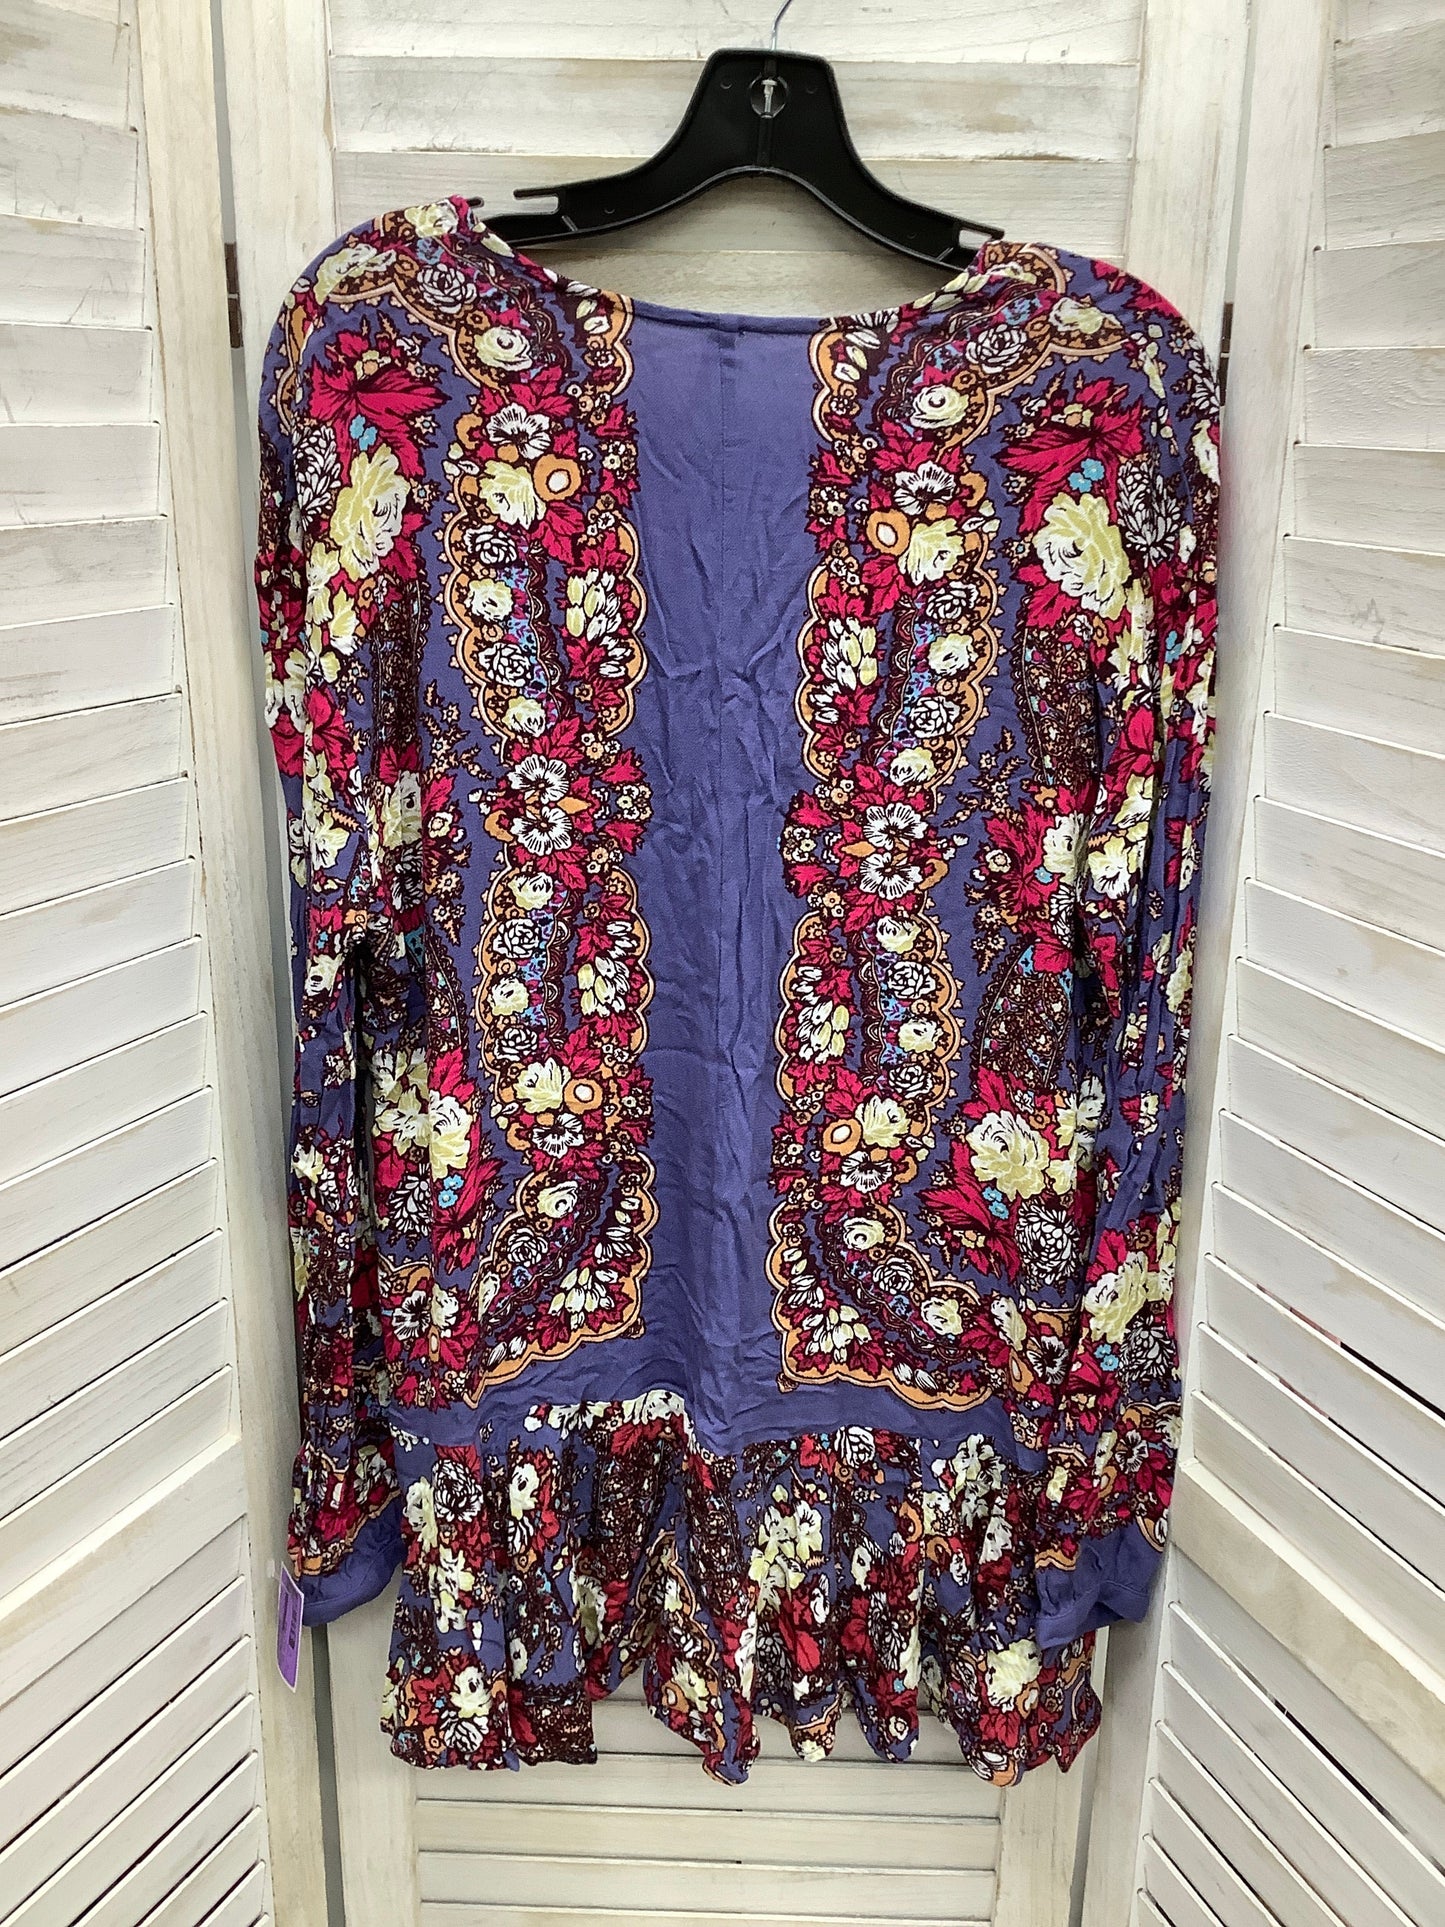 Floral Print Tunic 3/4 Sleeve Free People, Size L